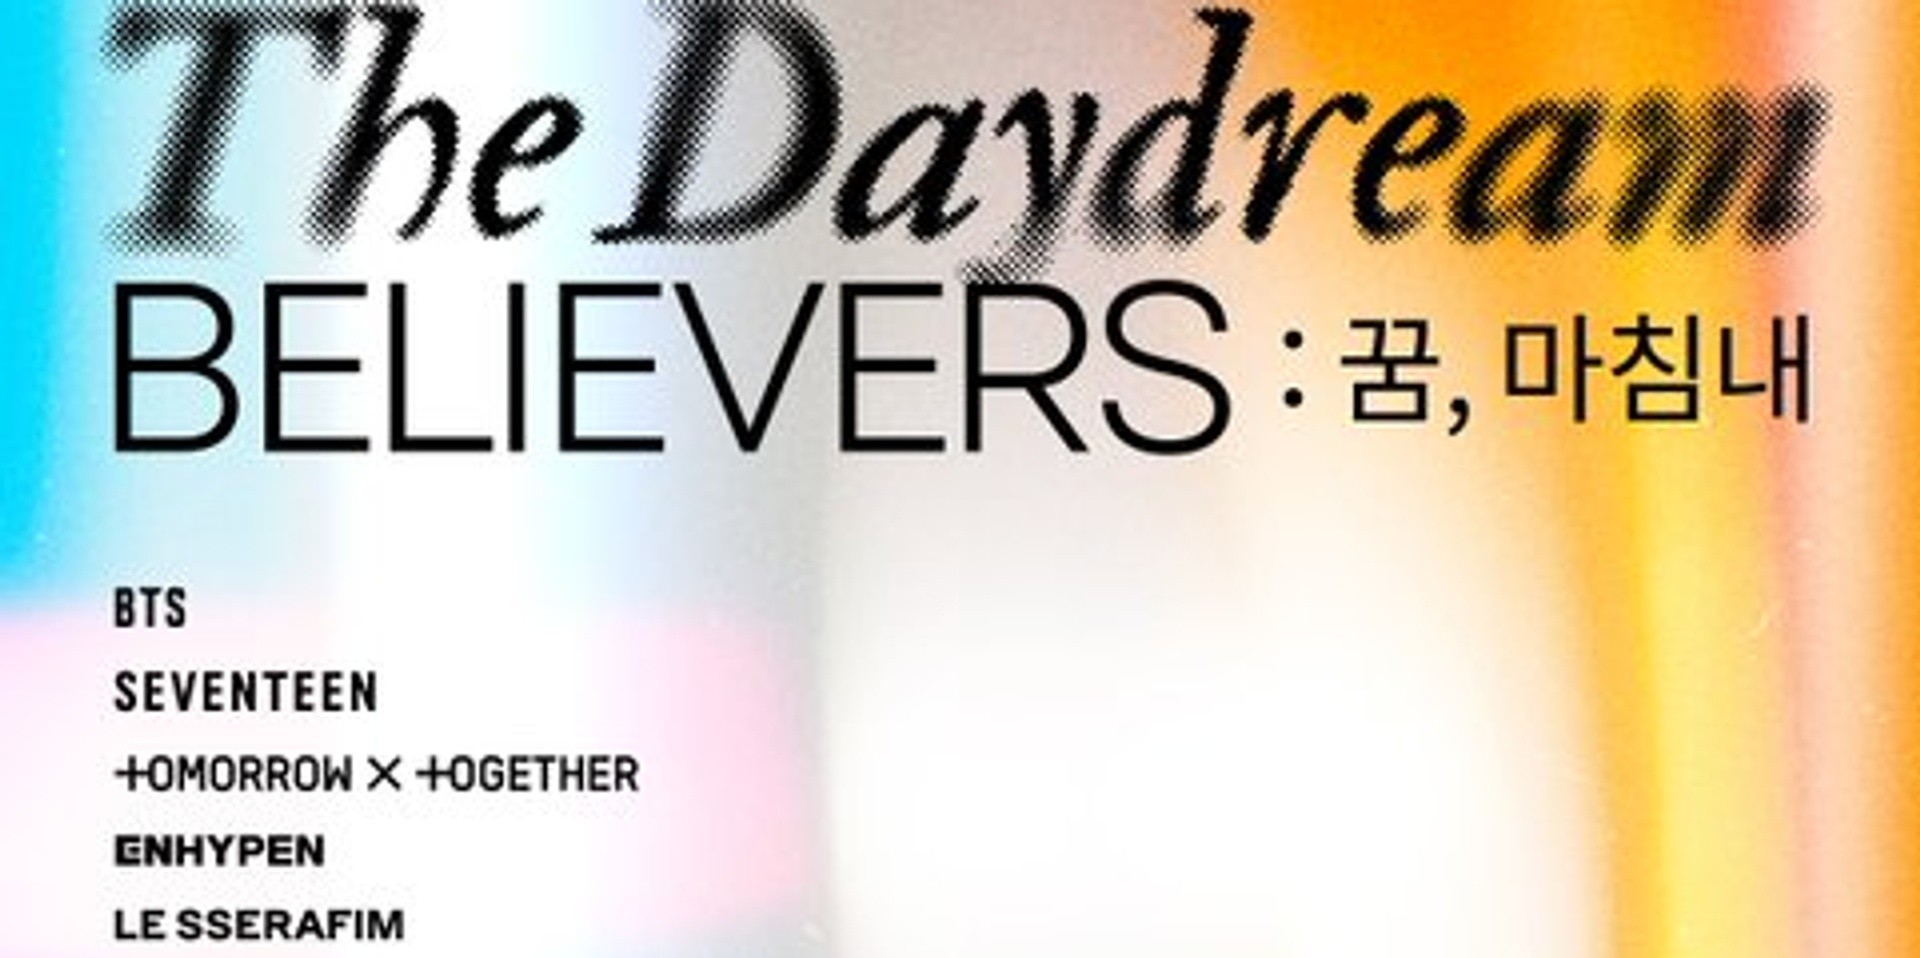 HYBE INSIGHT announces new exhibition 'The Daydream Believers' featuring BTS, TOMORROW X TOGETHER, SEVENTEEN, ENHYPEN, and LE SSERAFIM